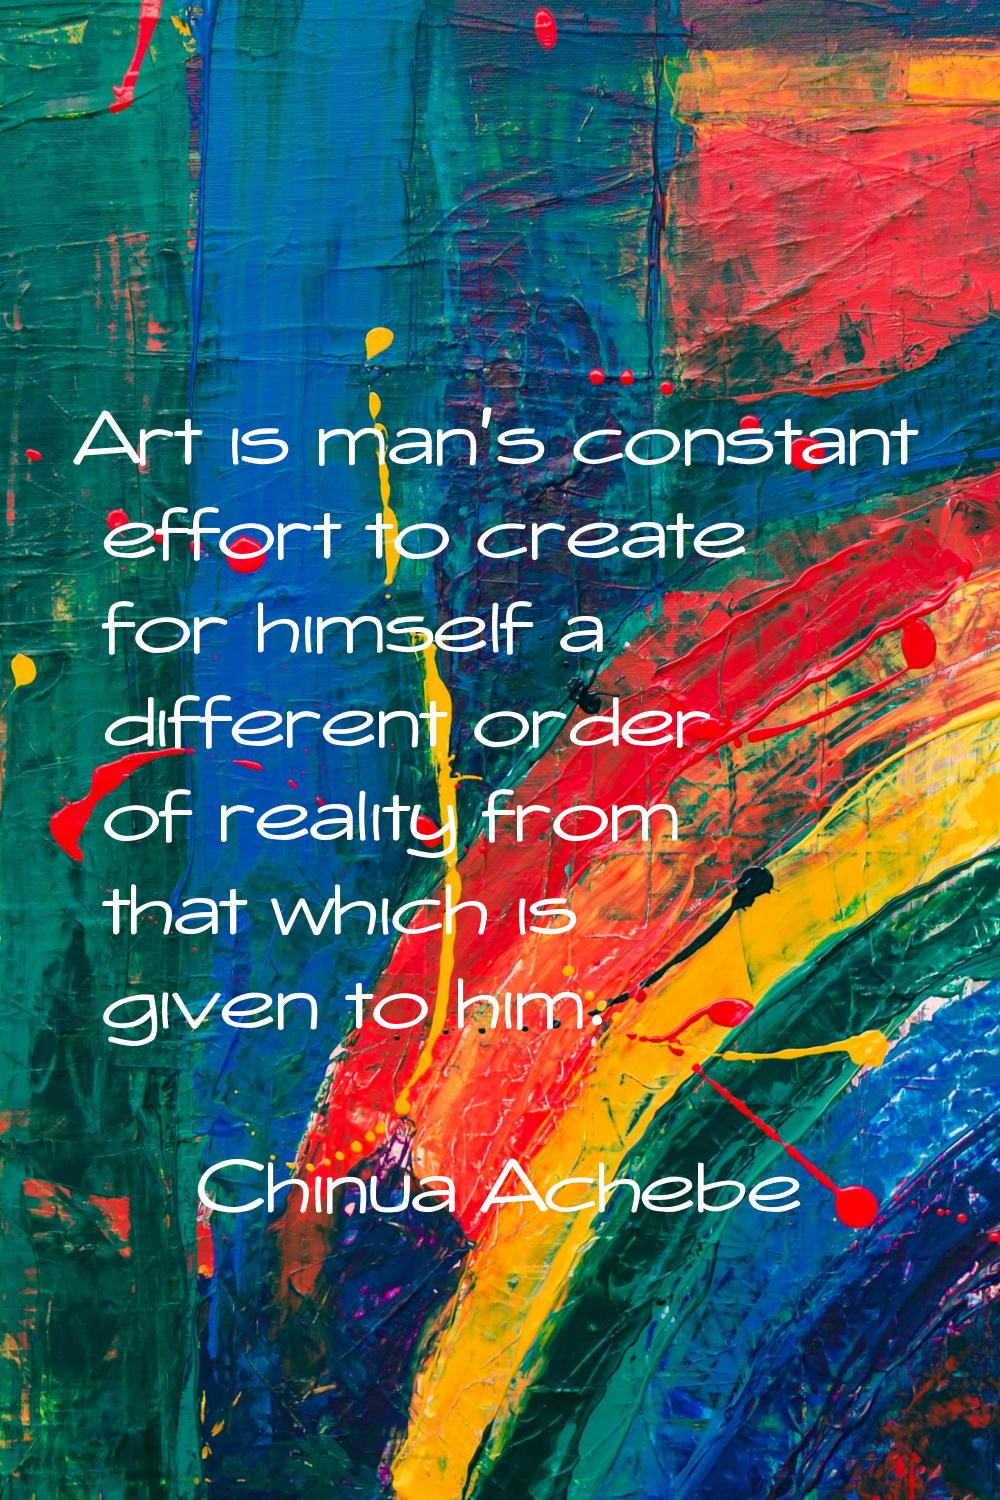 Art is man's constant effort to create for himself a different order of reality from that which is 